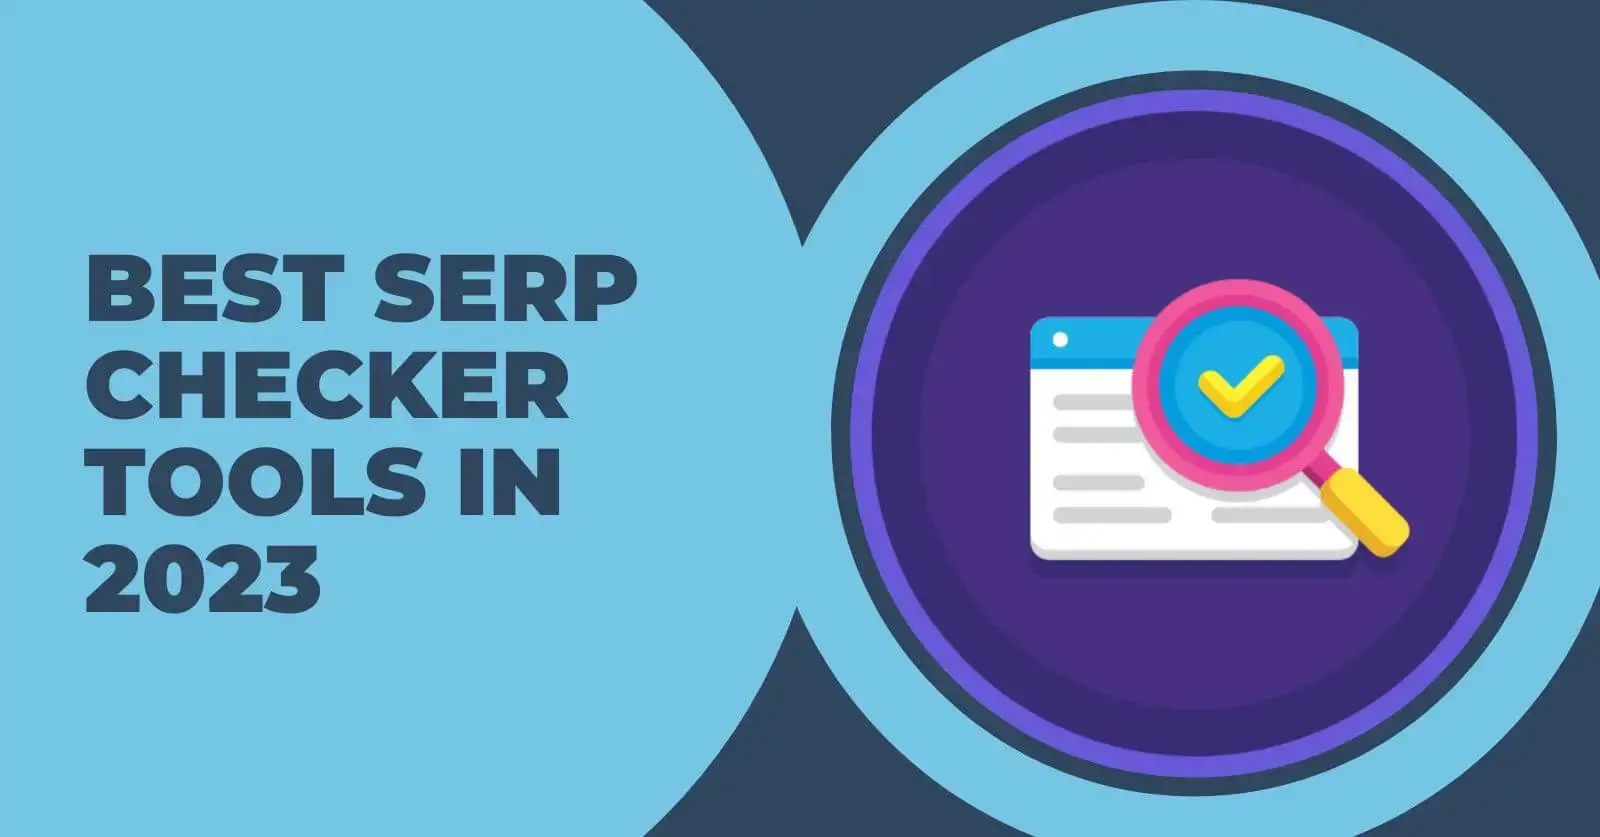 Best SERP Tracking Tools | List of Top SERP Checkers